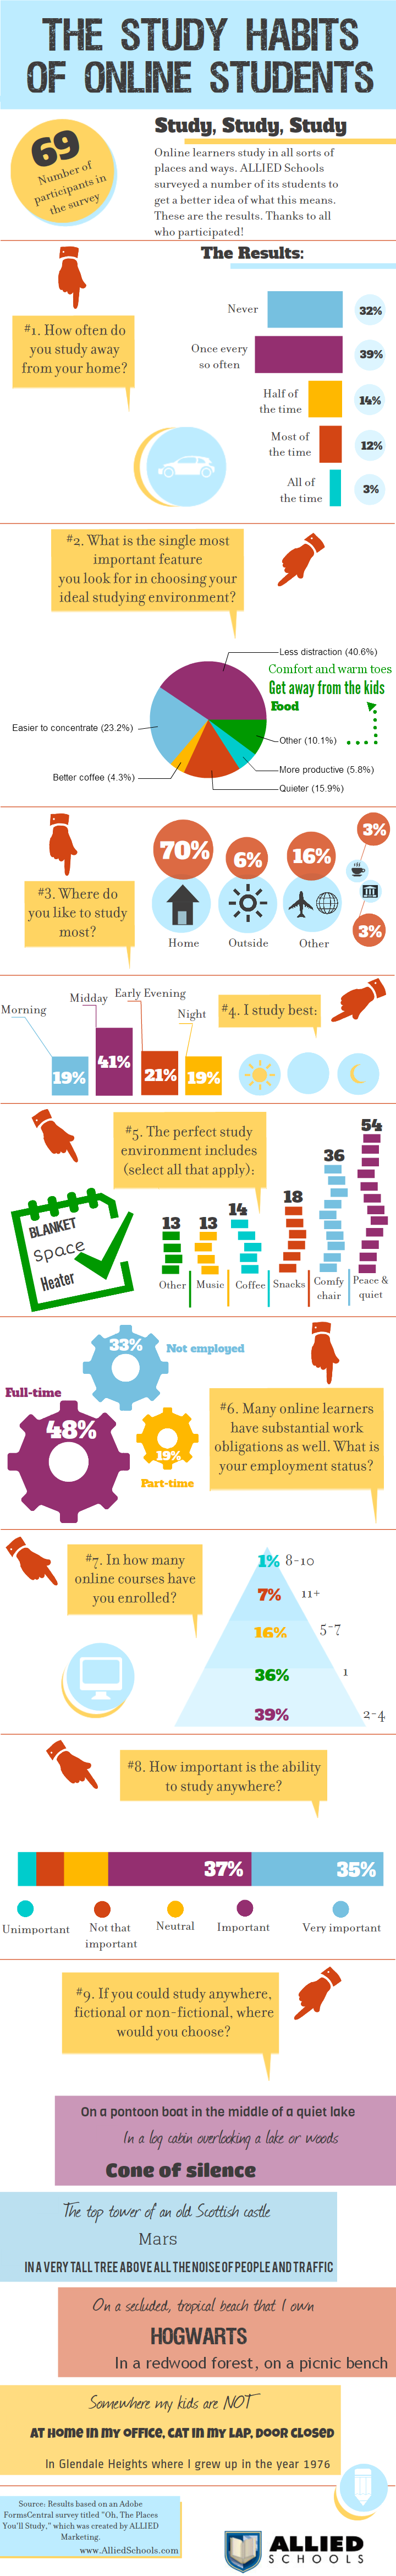 The Study Habits of Online Students